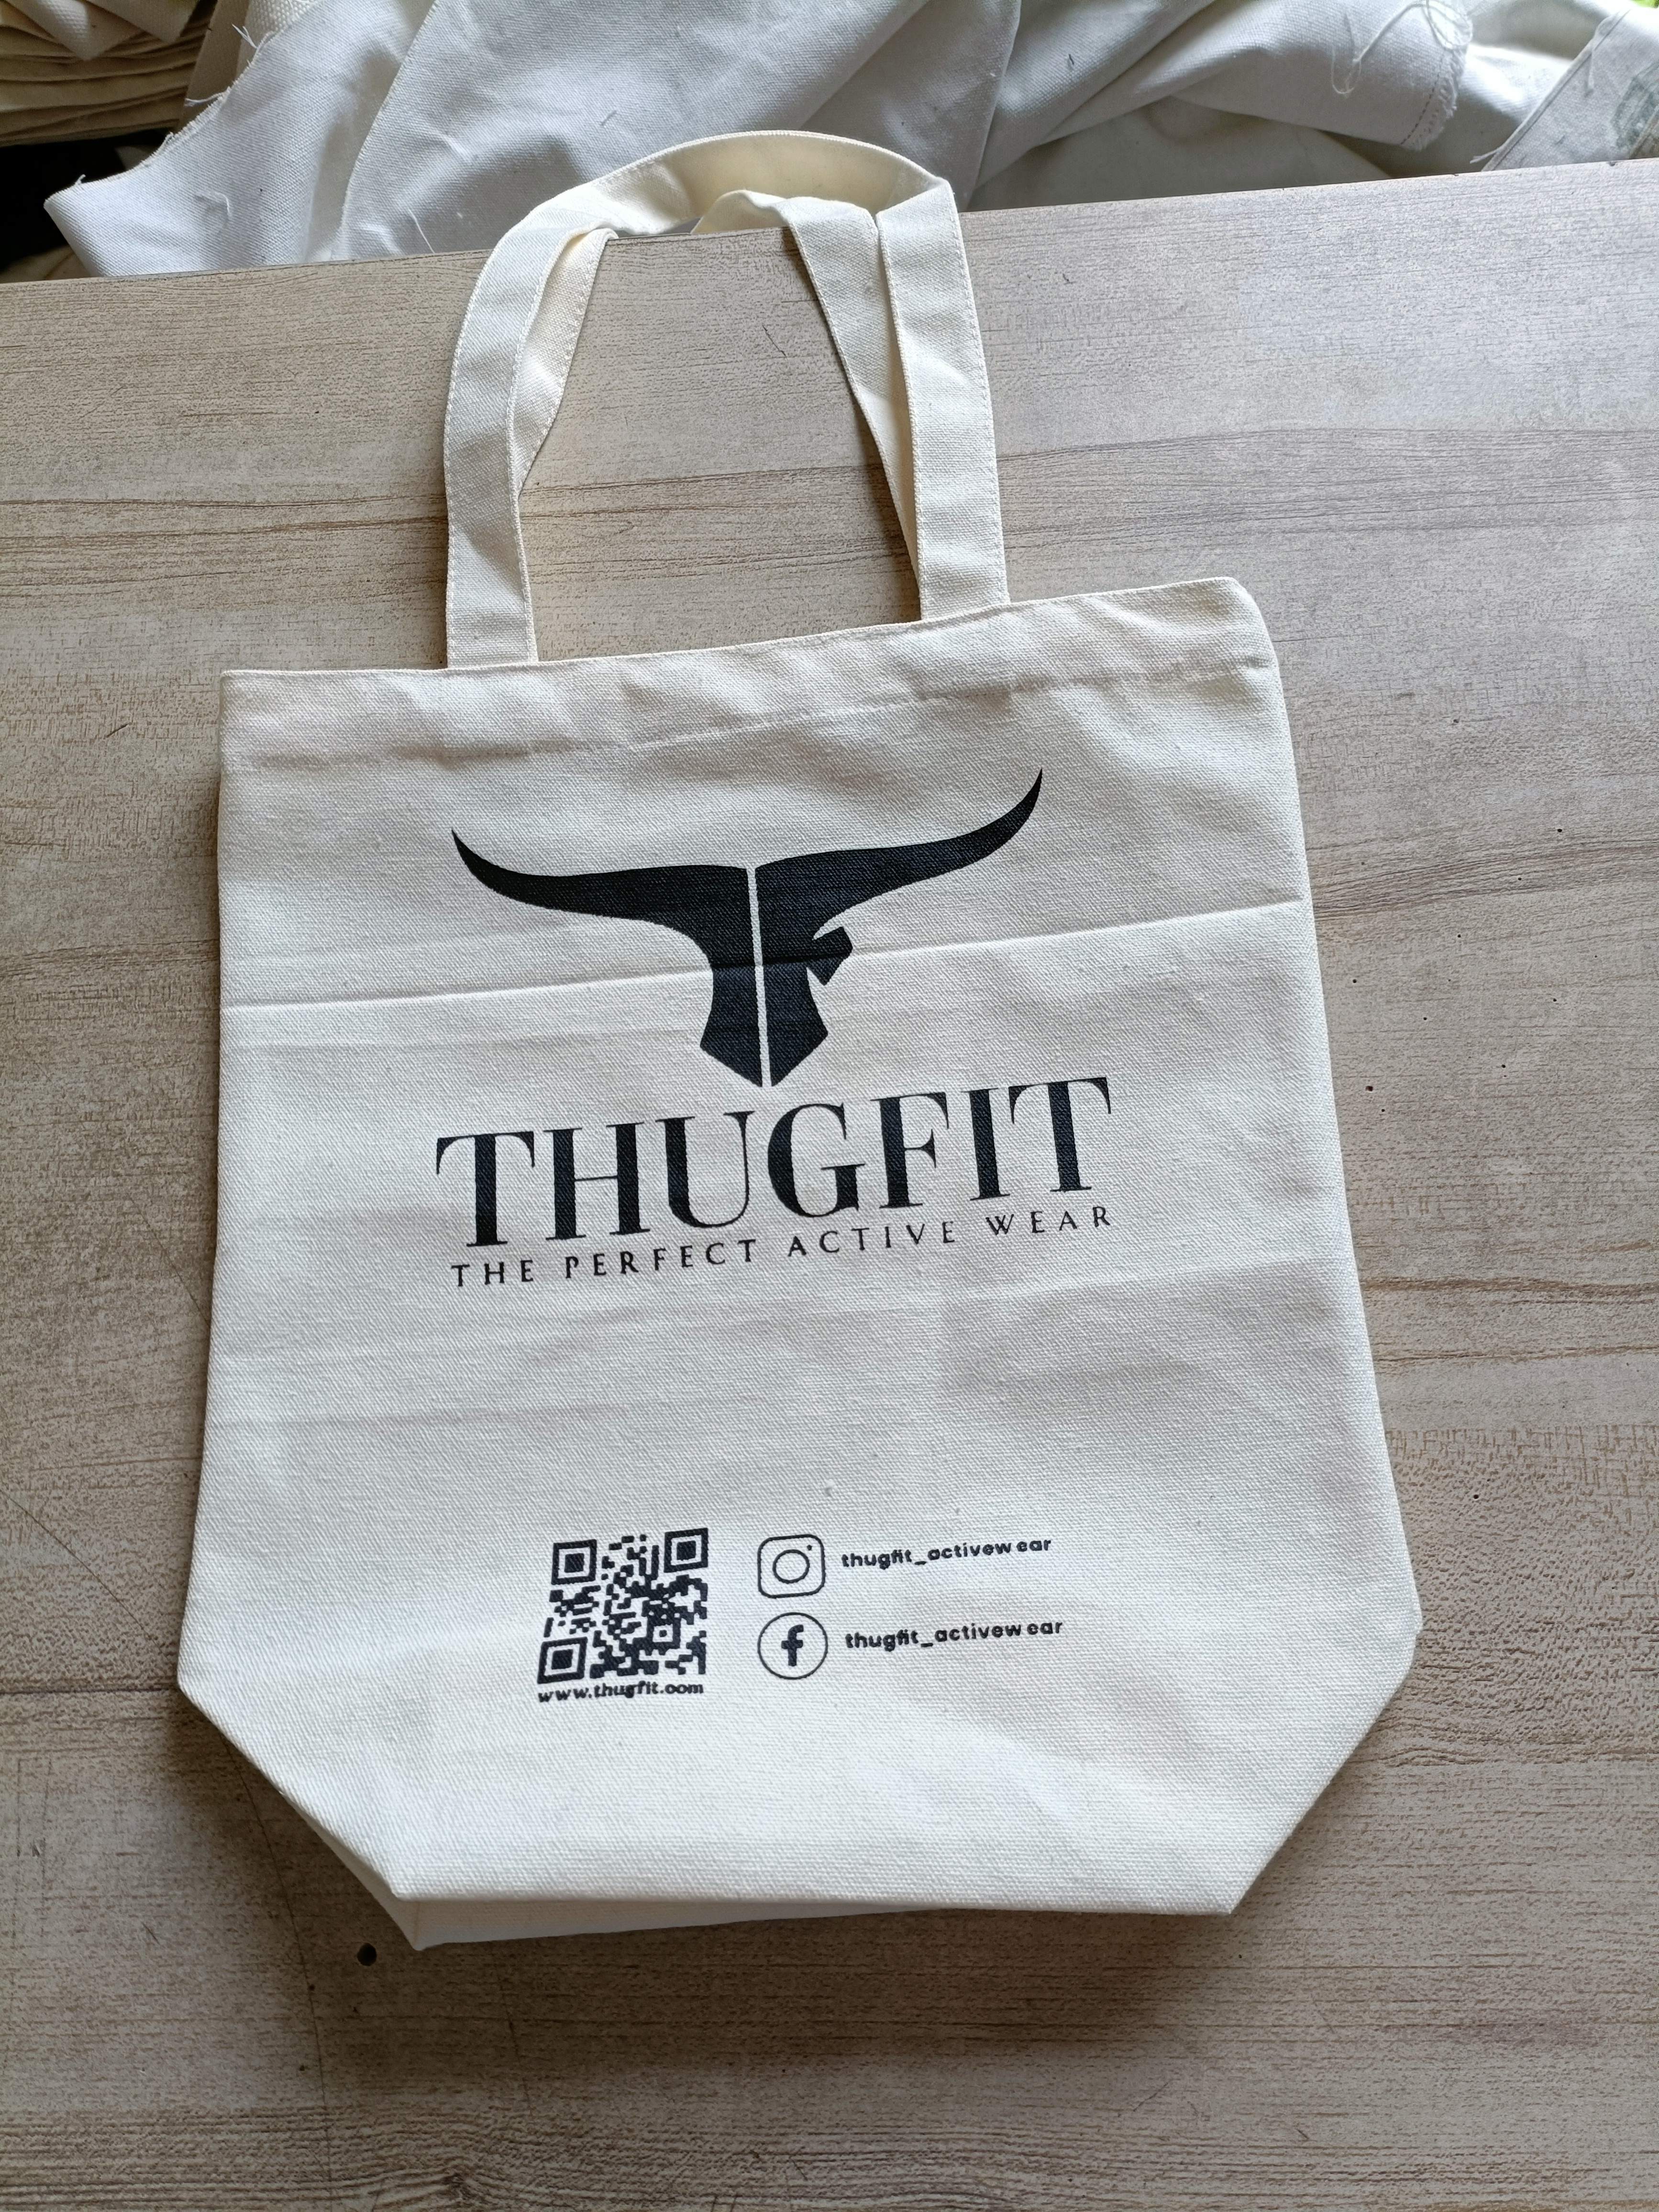 THUGFIT Chic and Sustainable Canvas Tote for Stylish Shopping - THUGFIT